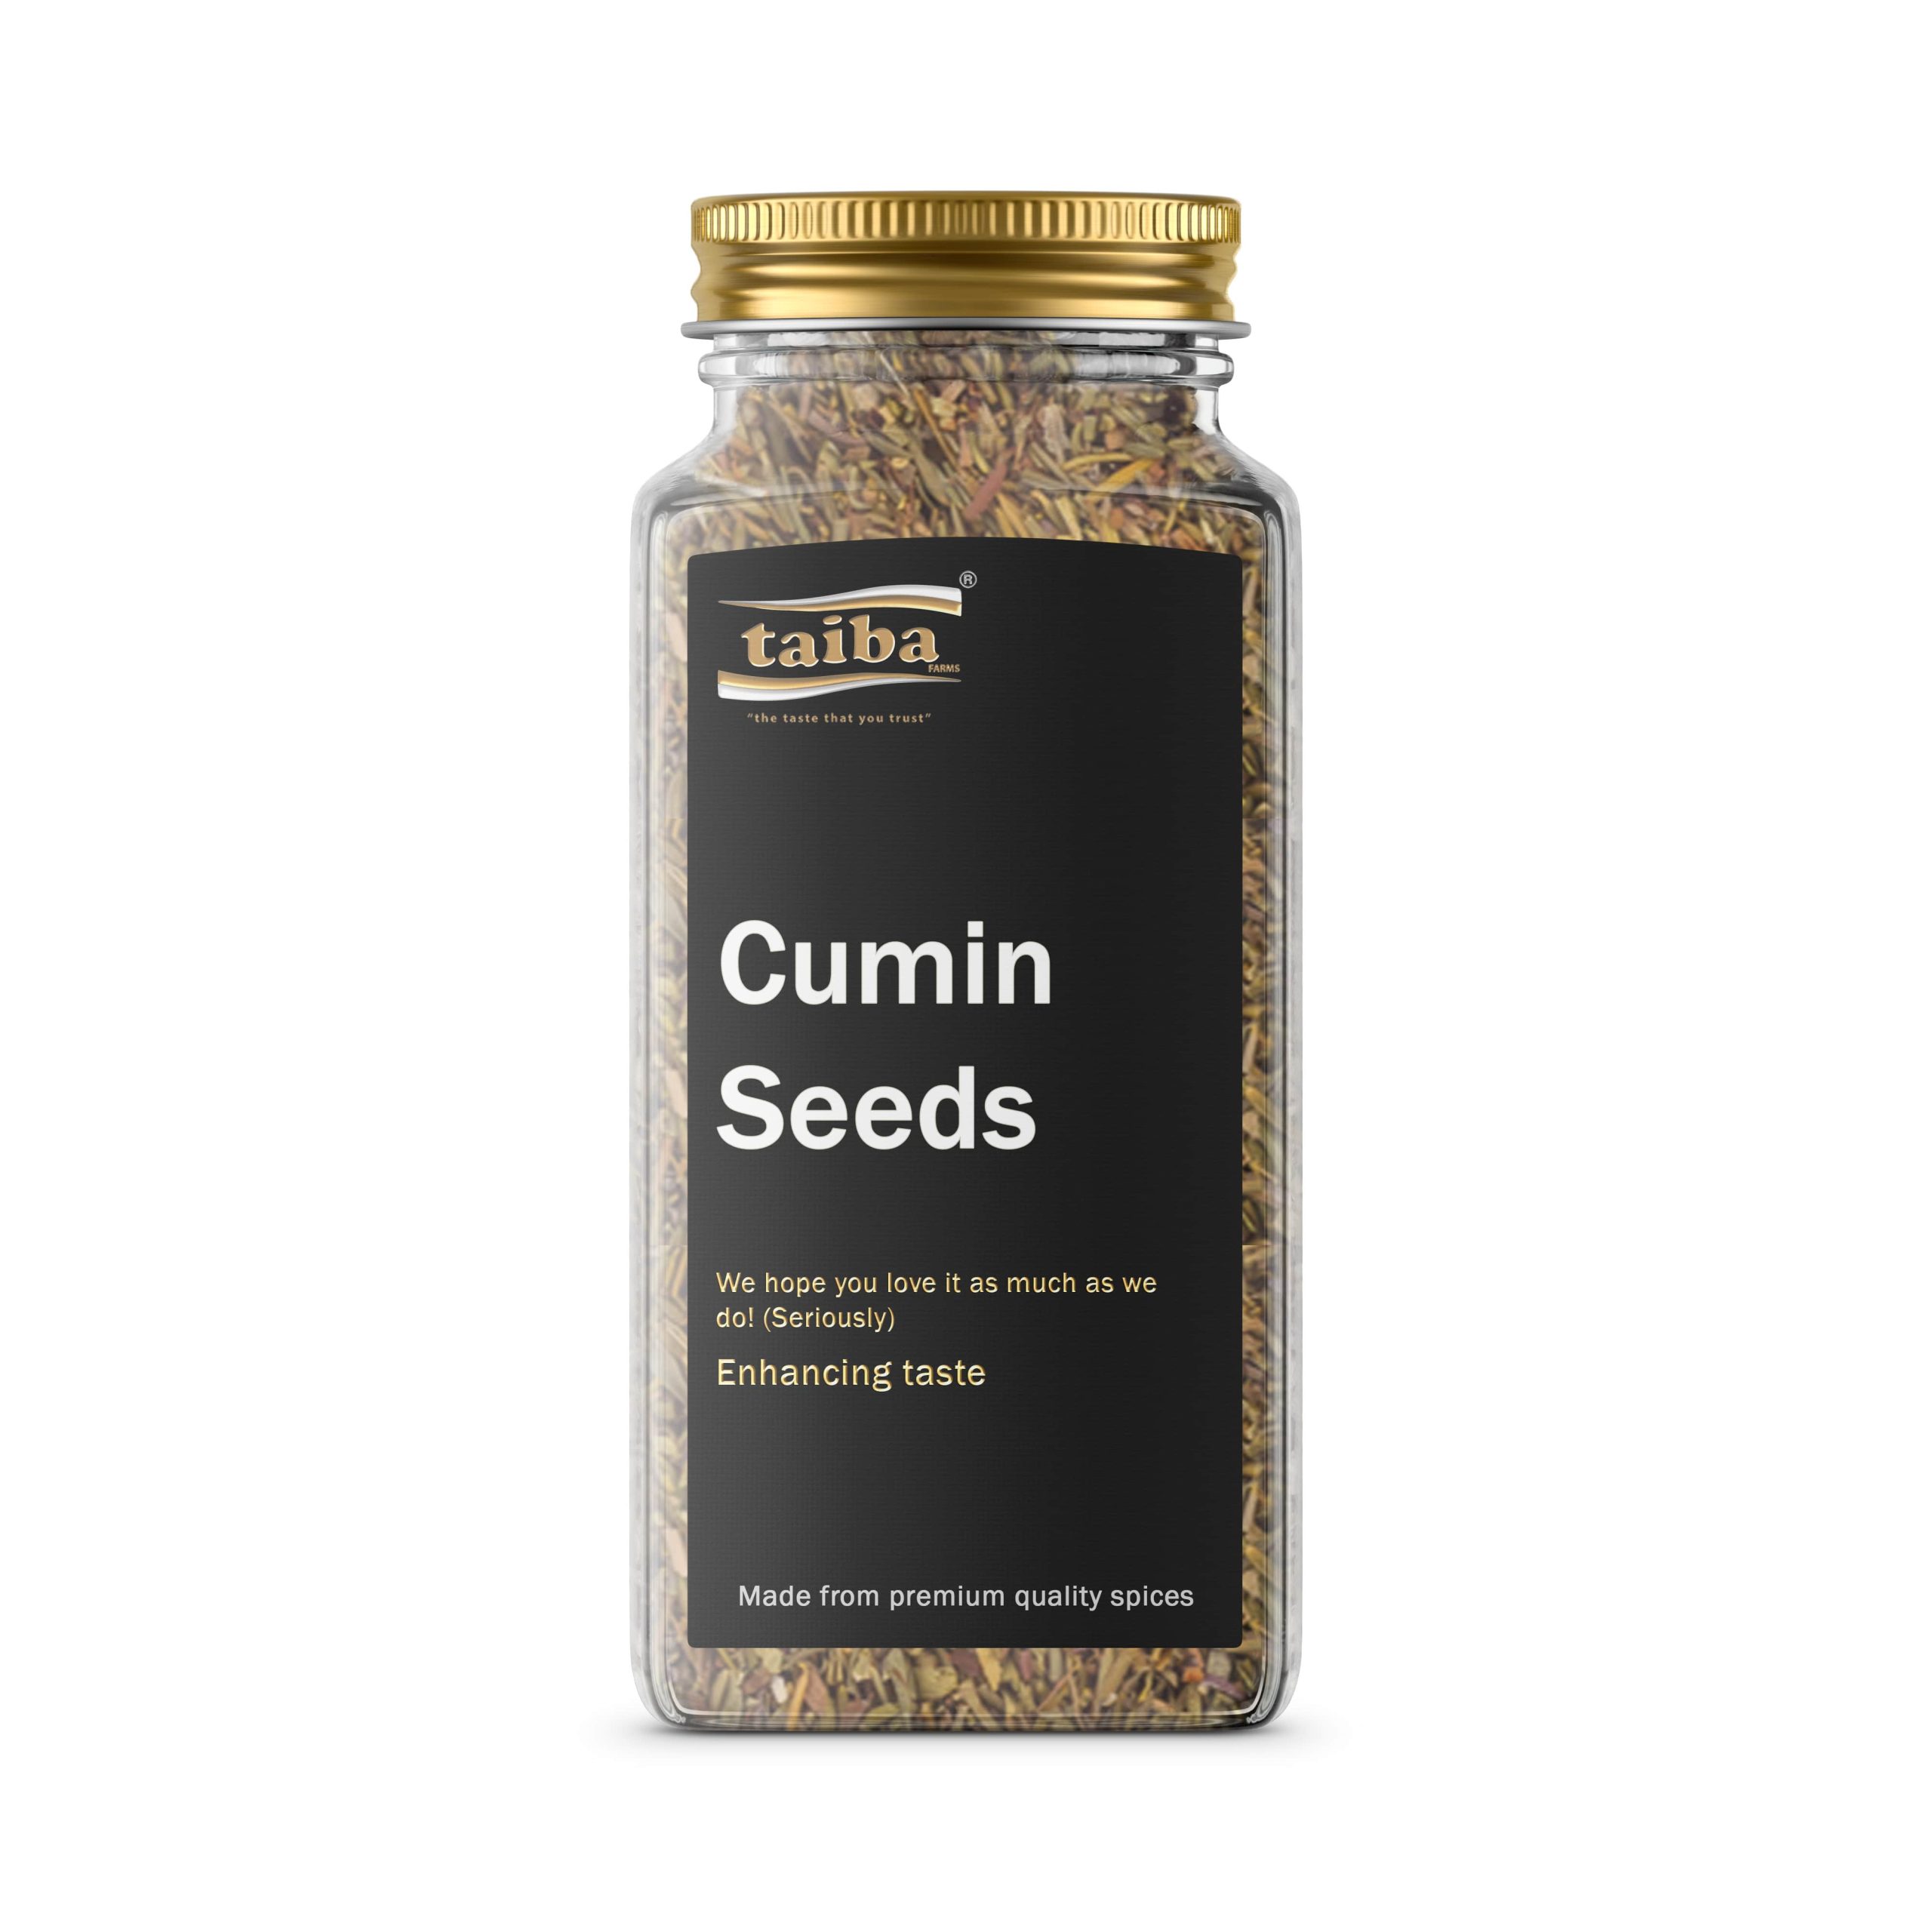 cumin-online-grocery-hearps-and-spices-online-export-and-import-companies-in-Brazil-Egypt-saudi-arabia-oman